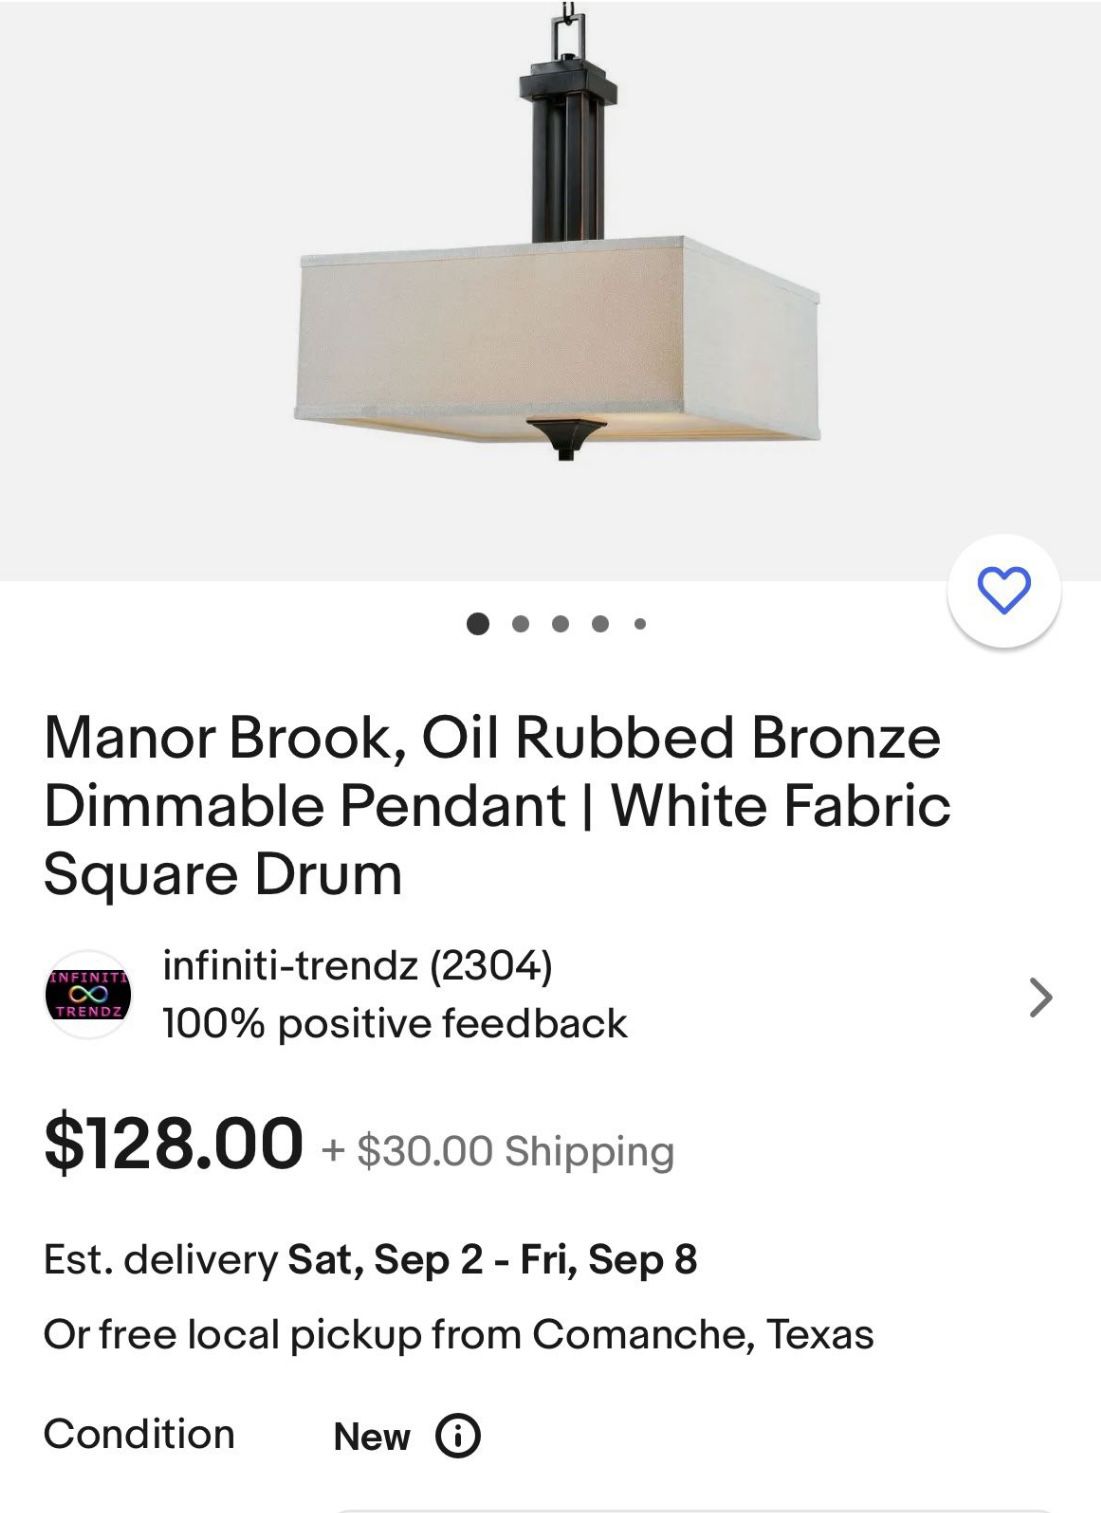 Manor Brook, Oil Rubbed Bronze Dimmable Pendant | White Fabric Square Drum